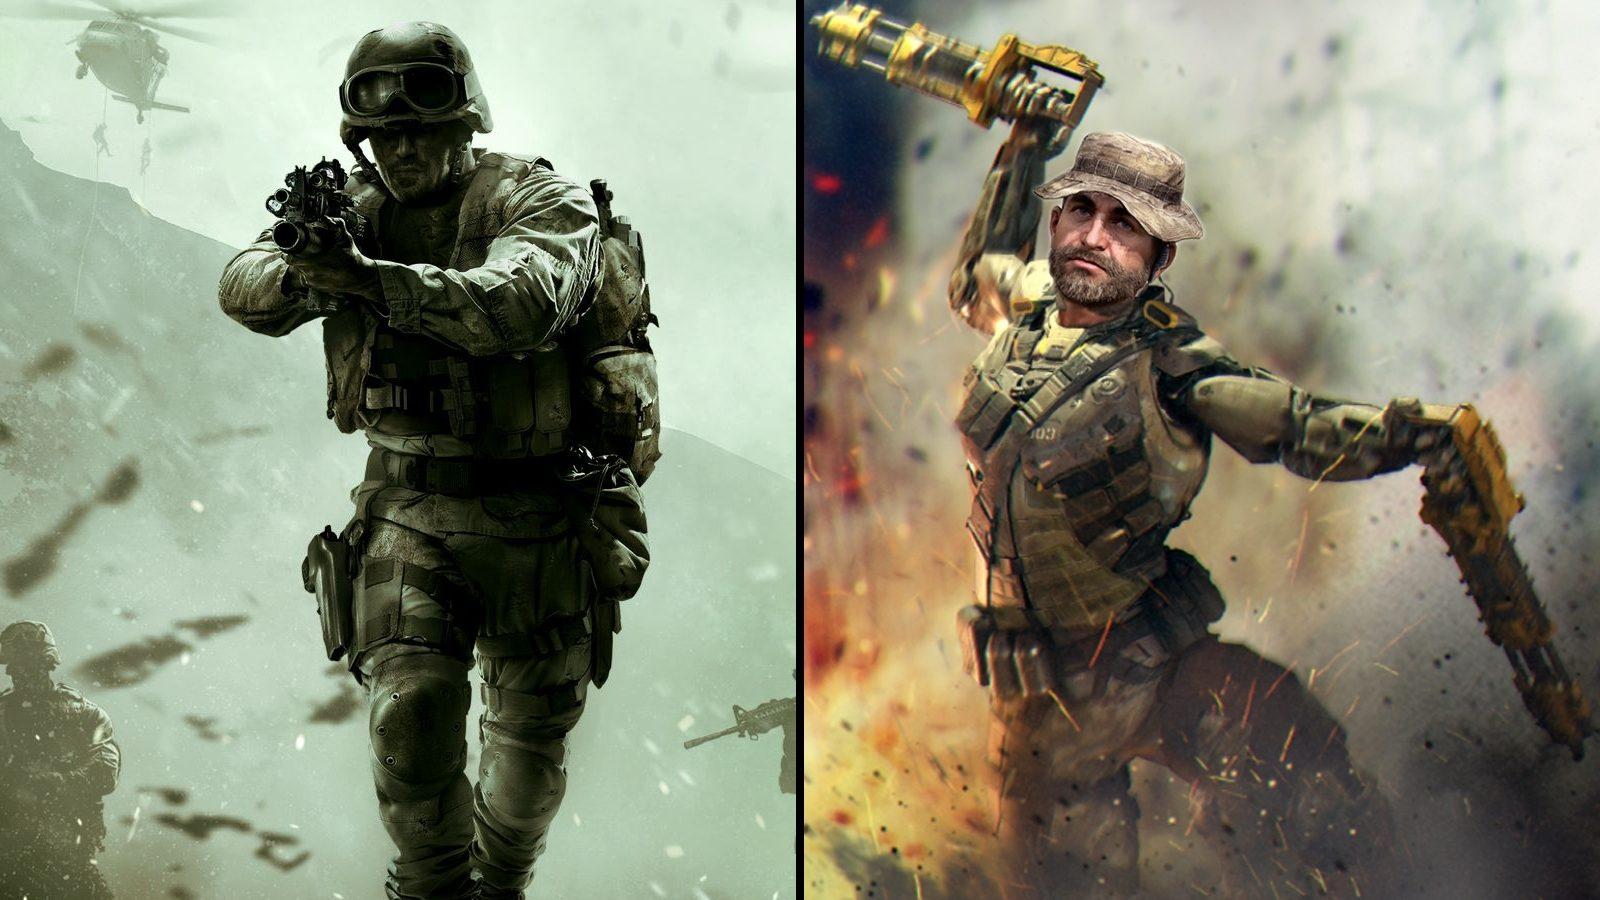 CoD 2019: Rumor suggests Modern Warfare 4 with Specialists, Battle